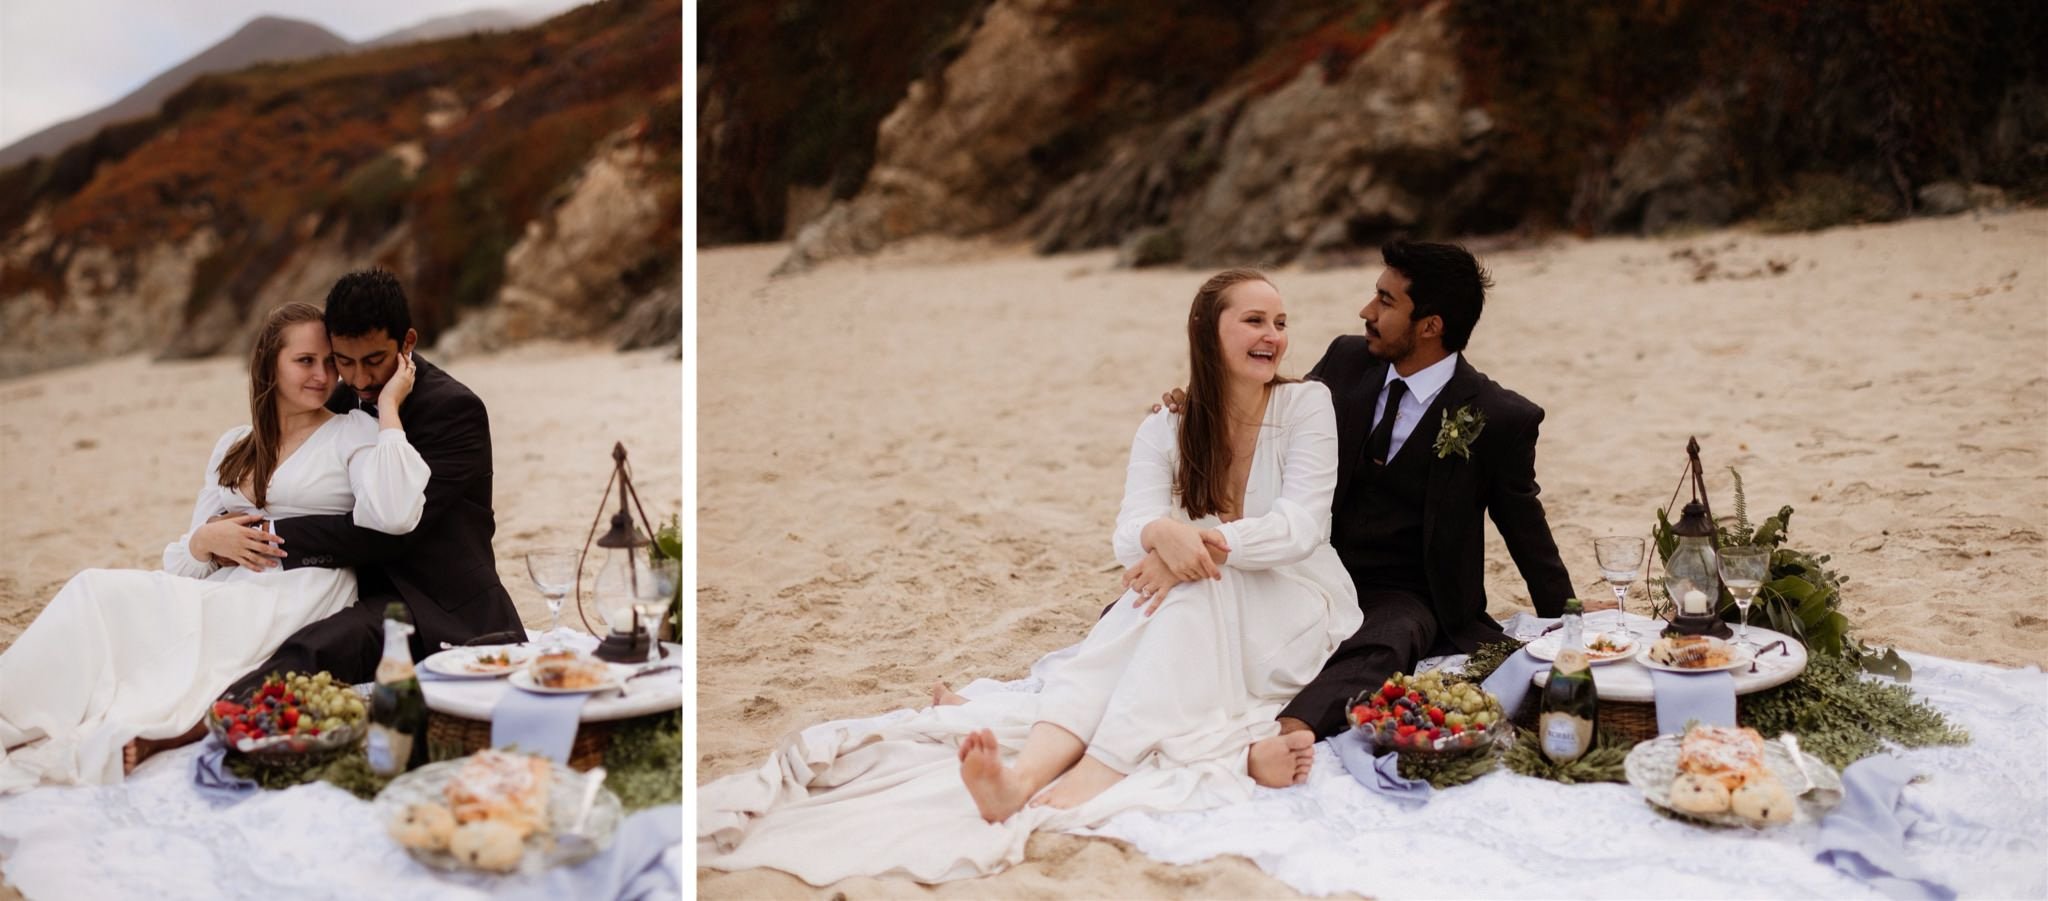 126_Two-Day Big Sur Redwoods Elopement with Family_Will Khoury Elopement Photographer.jpg